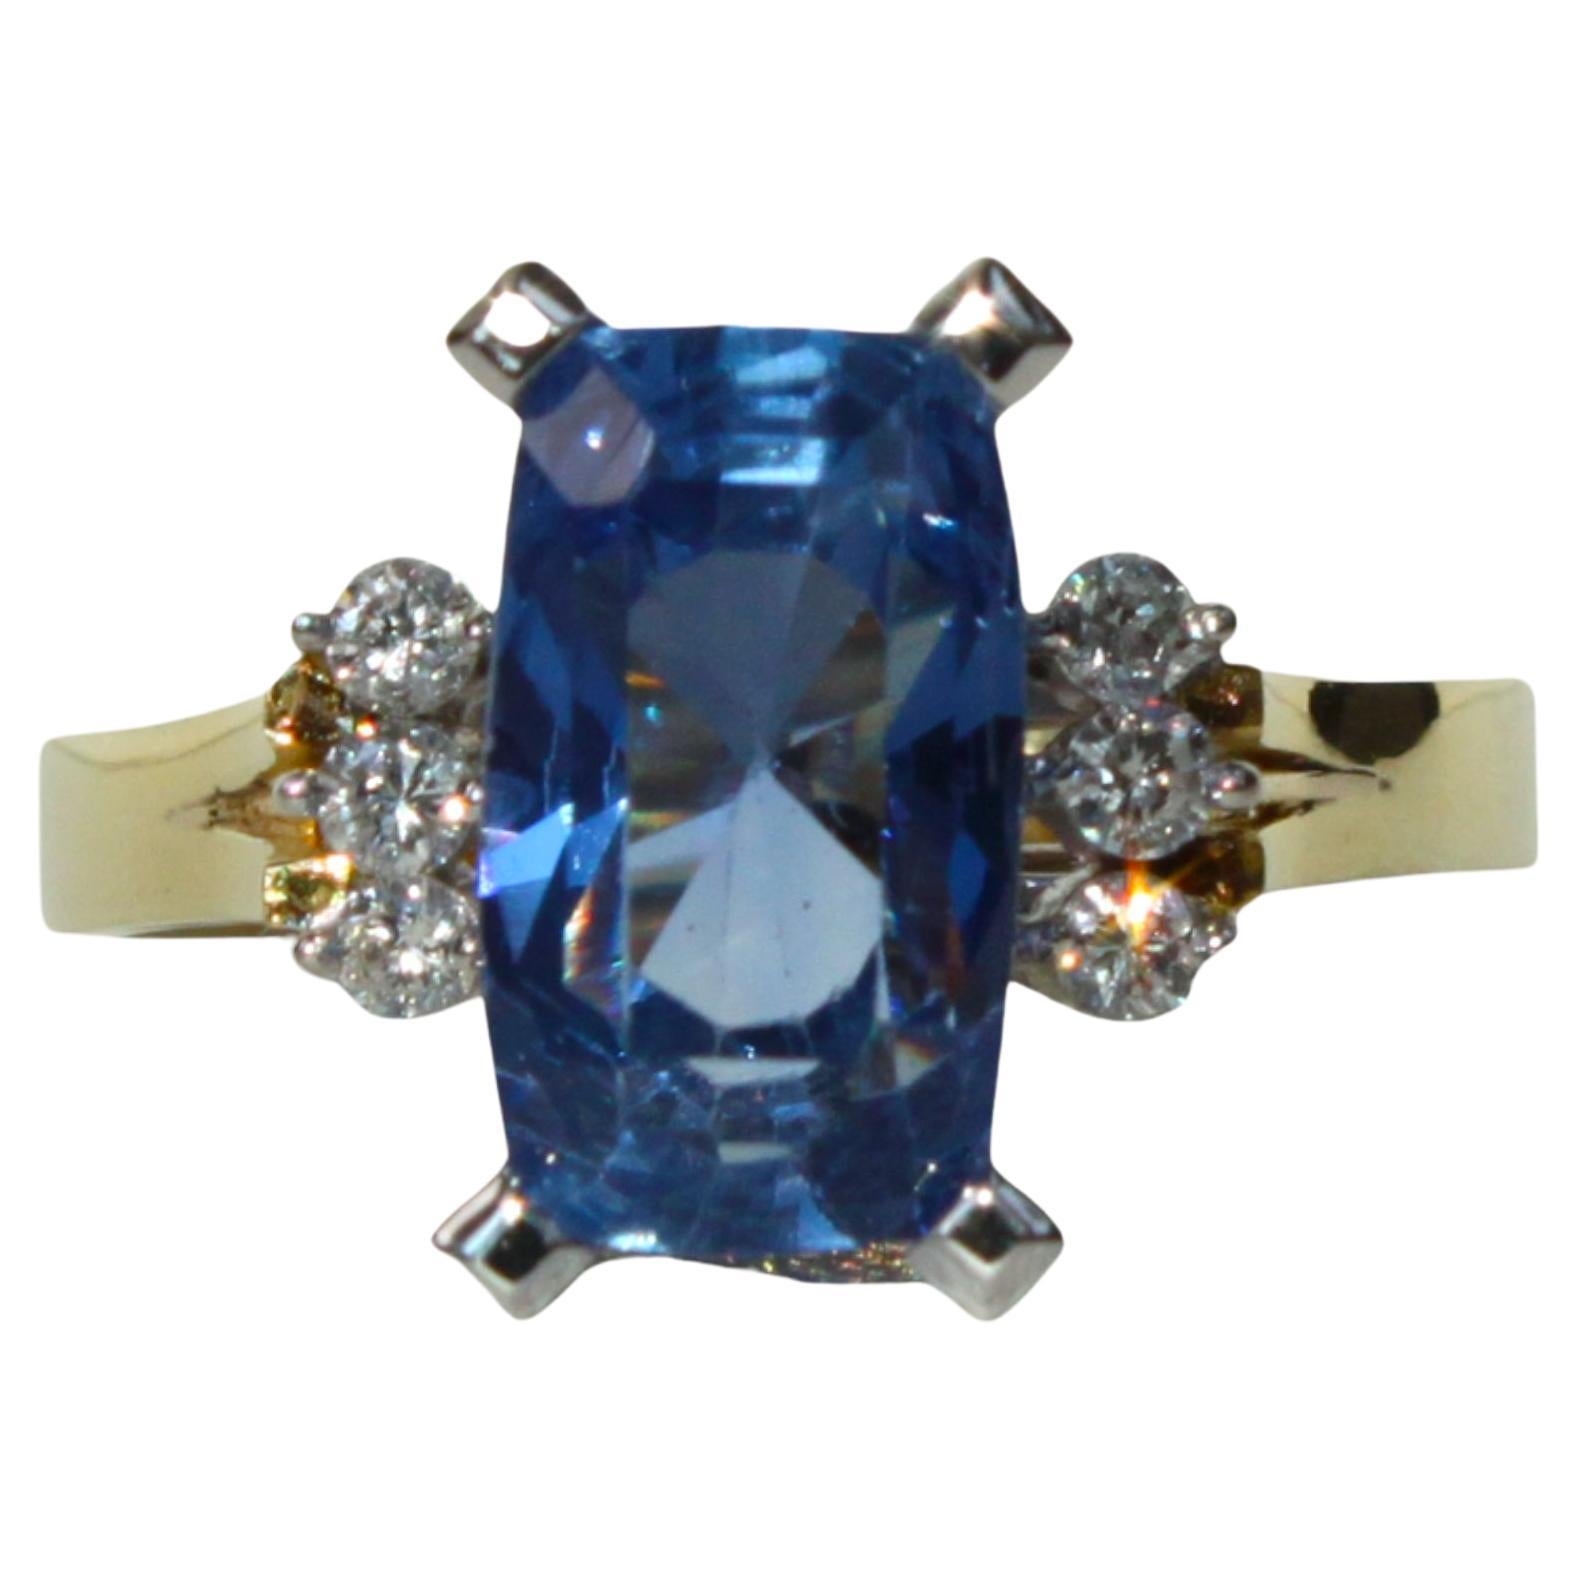 Vintage Cushion Cut Ceylon Blue Sapphire Ring in 18K Gold with Natural Diamonds